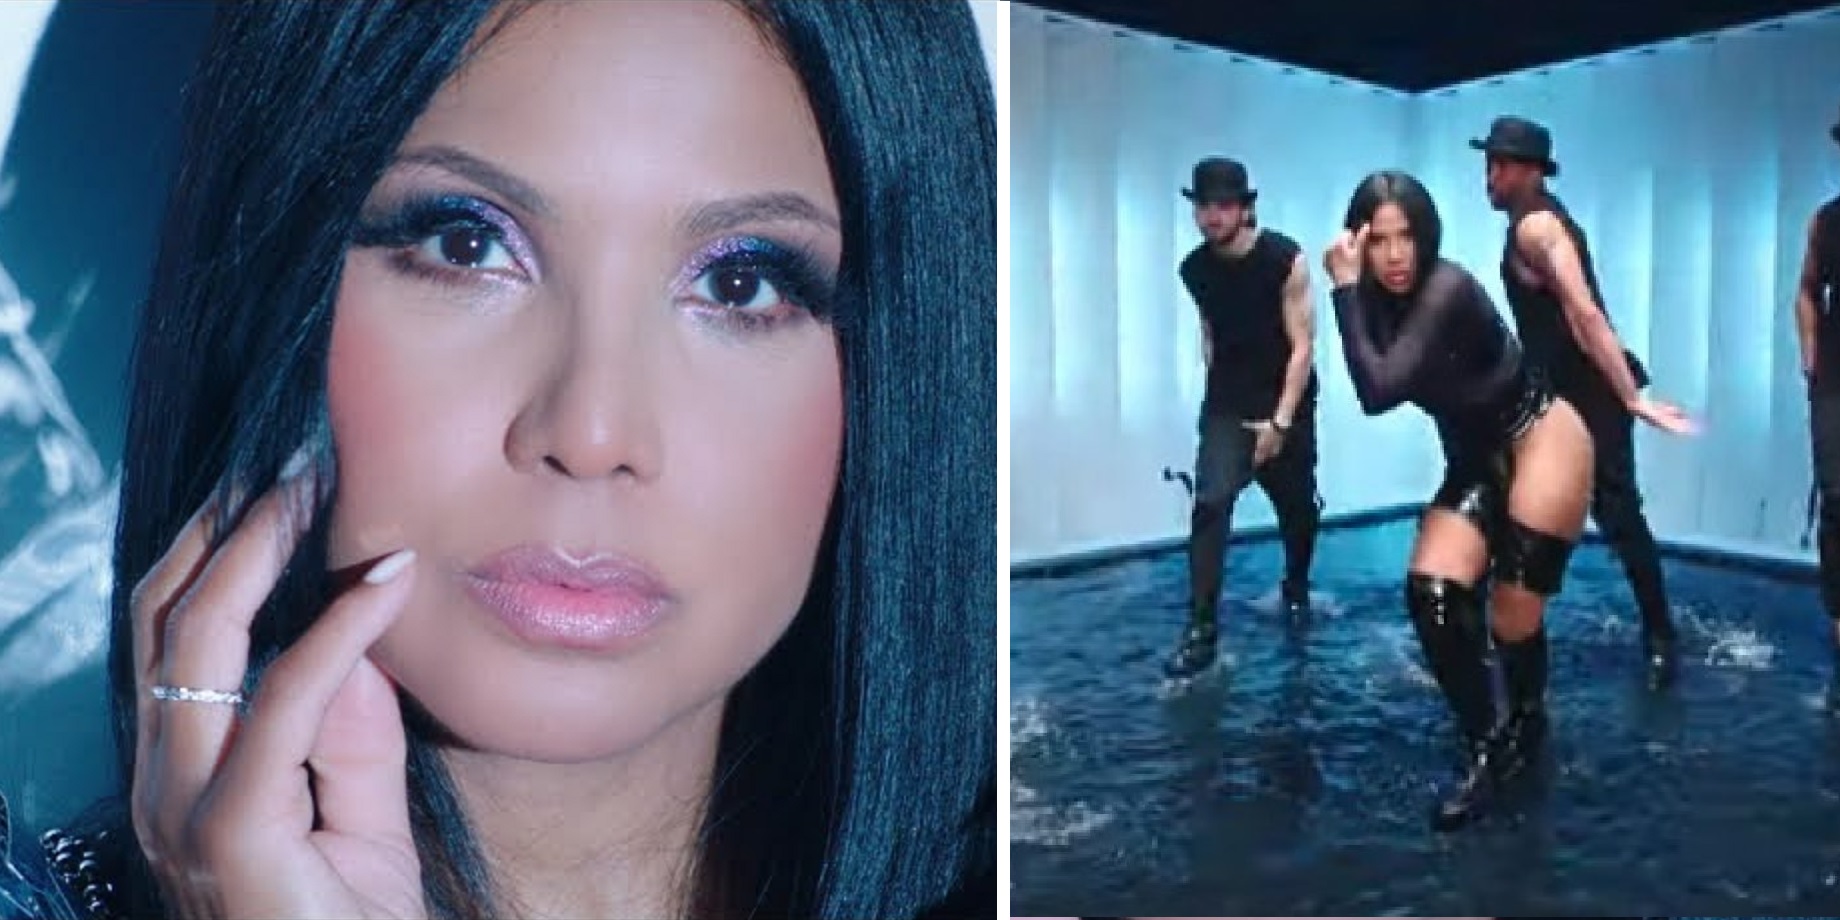 Watch: New Music Video For Toni Braxton’s Disco-Inspired Bop – ‘Dance’